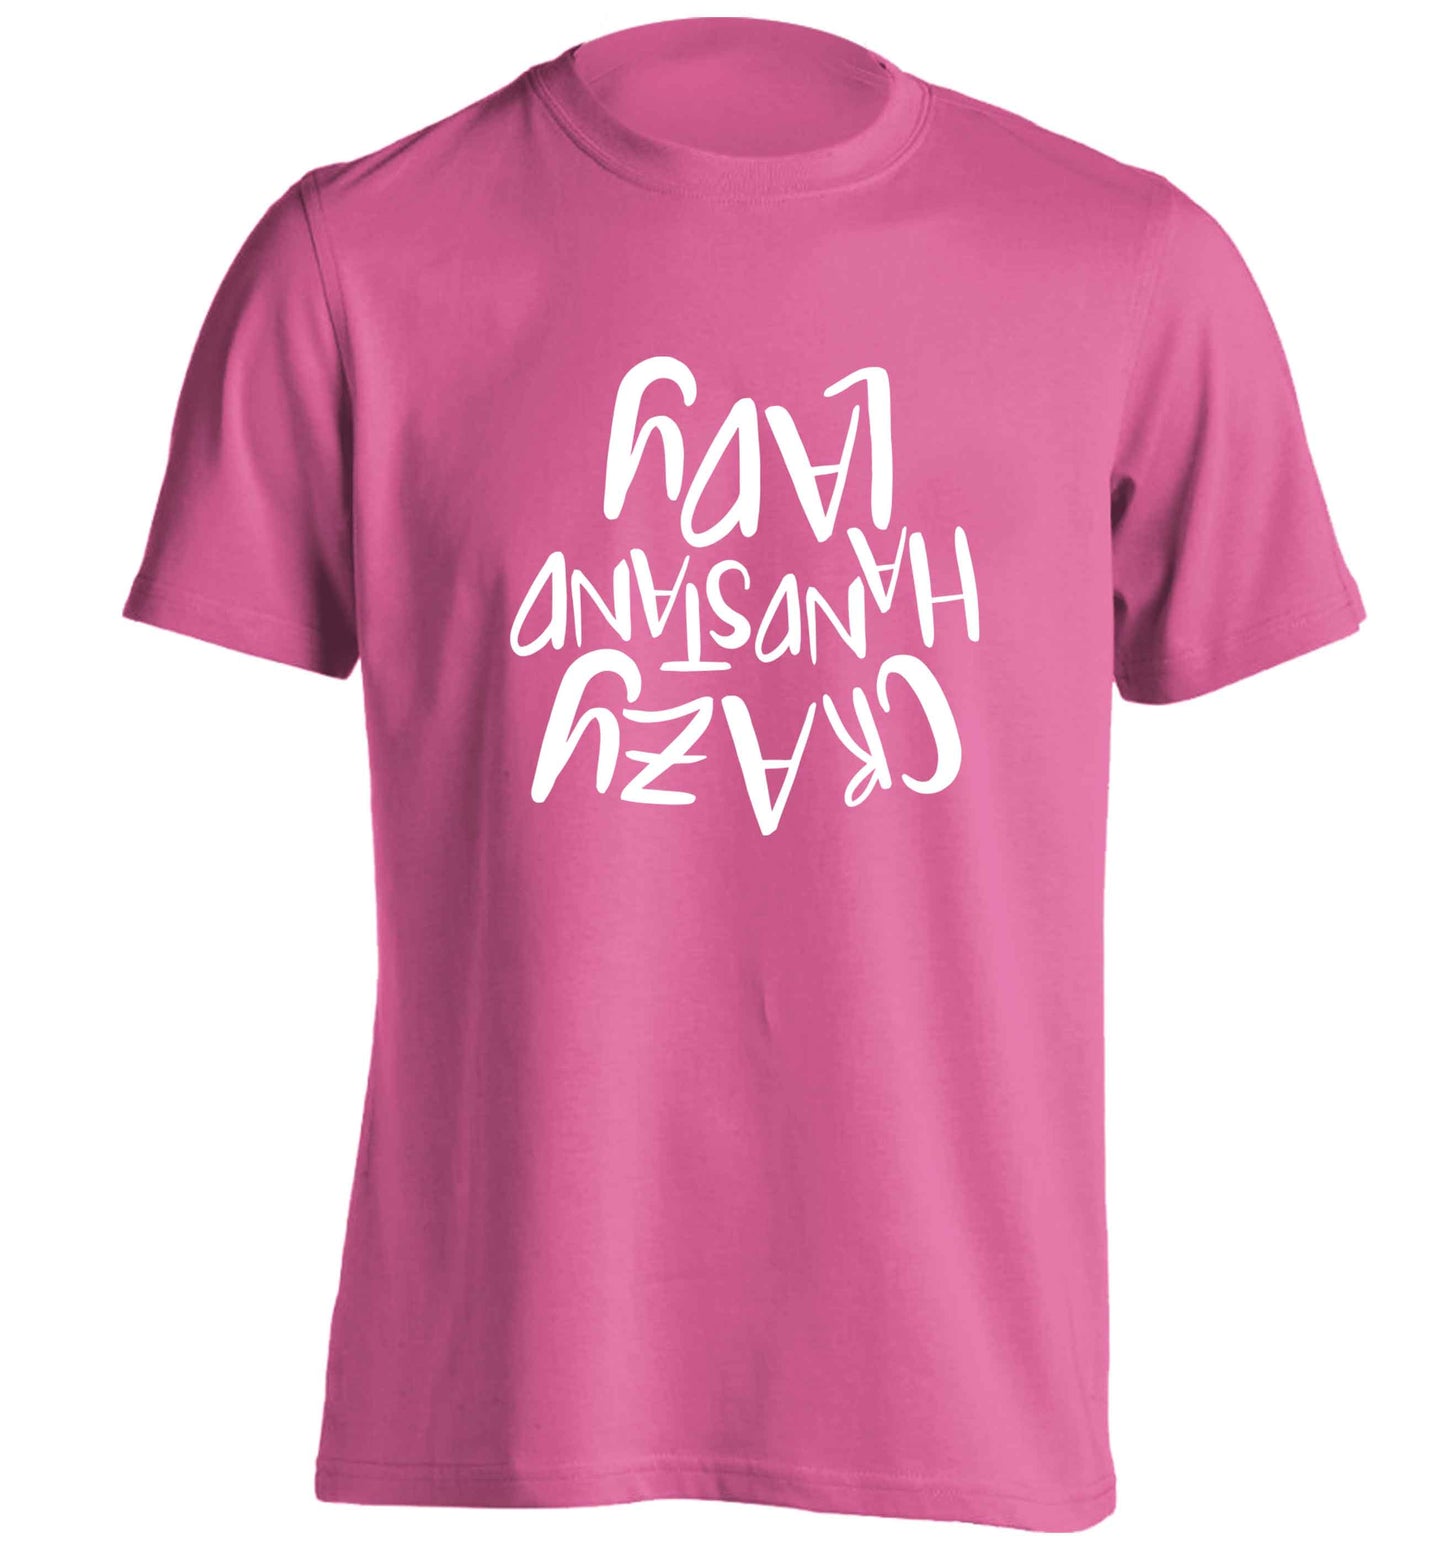 Crazy handstand lady adults unisex pink Tshirt 2XL